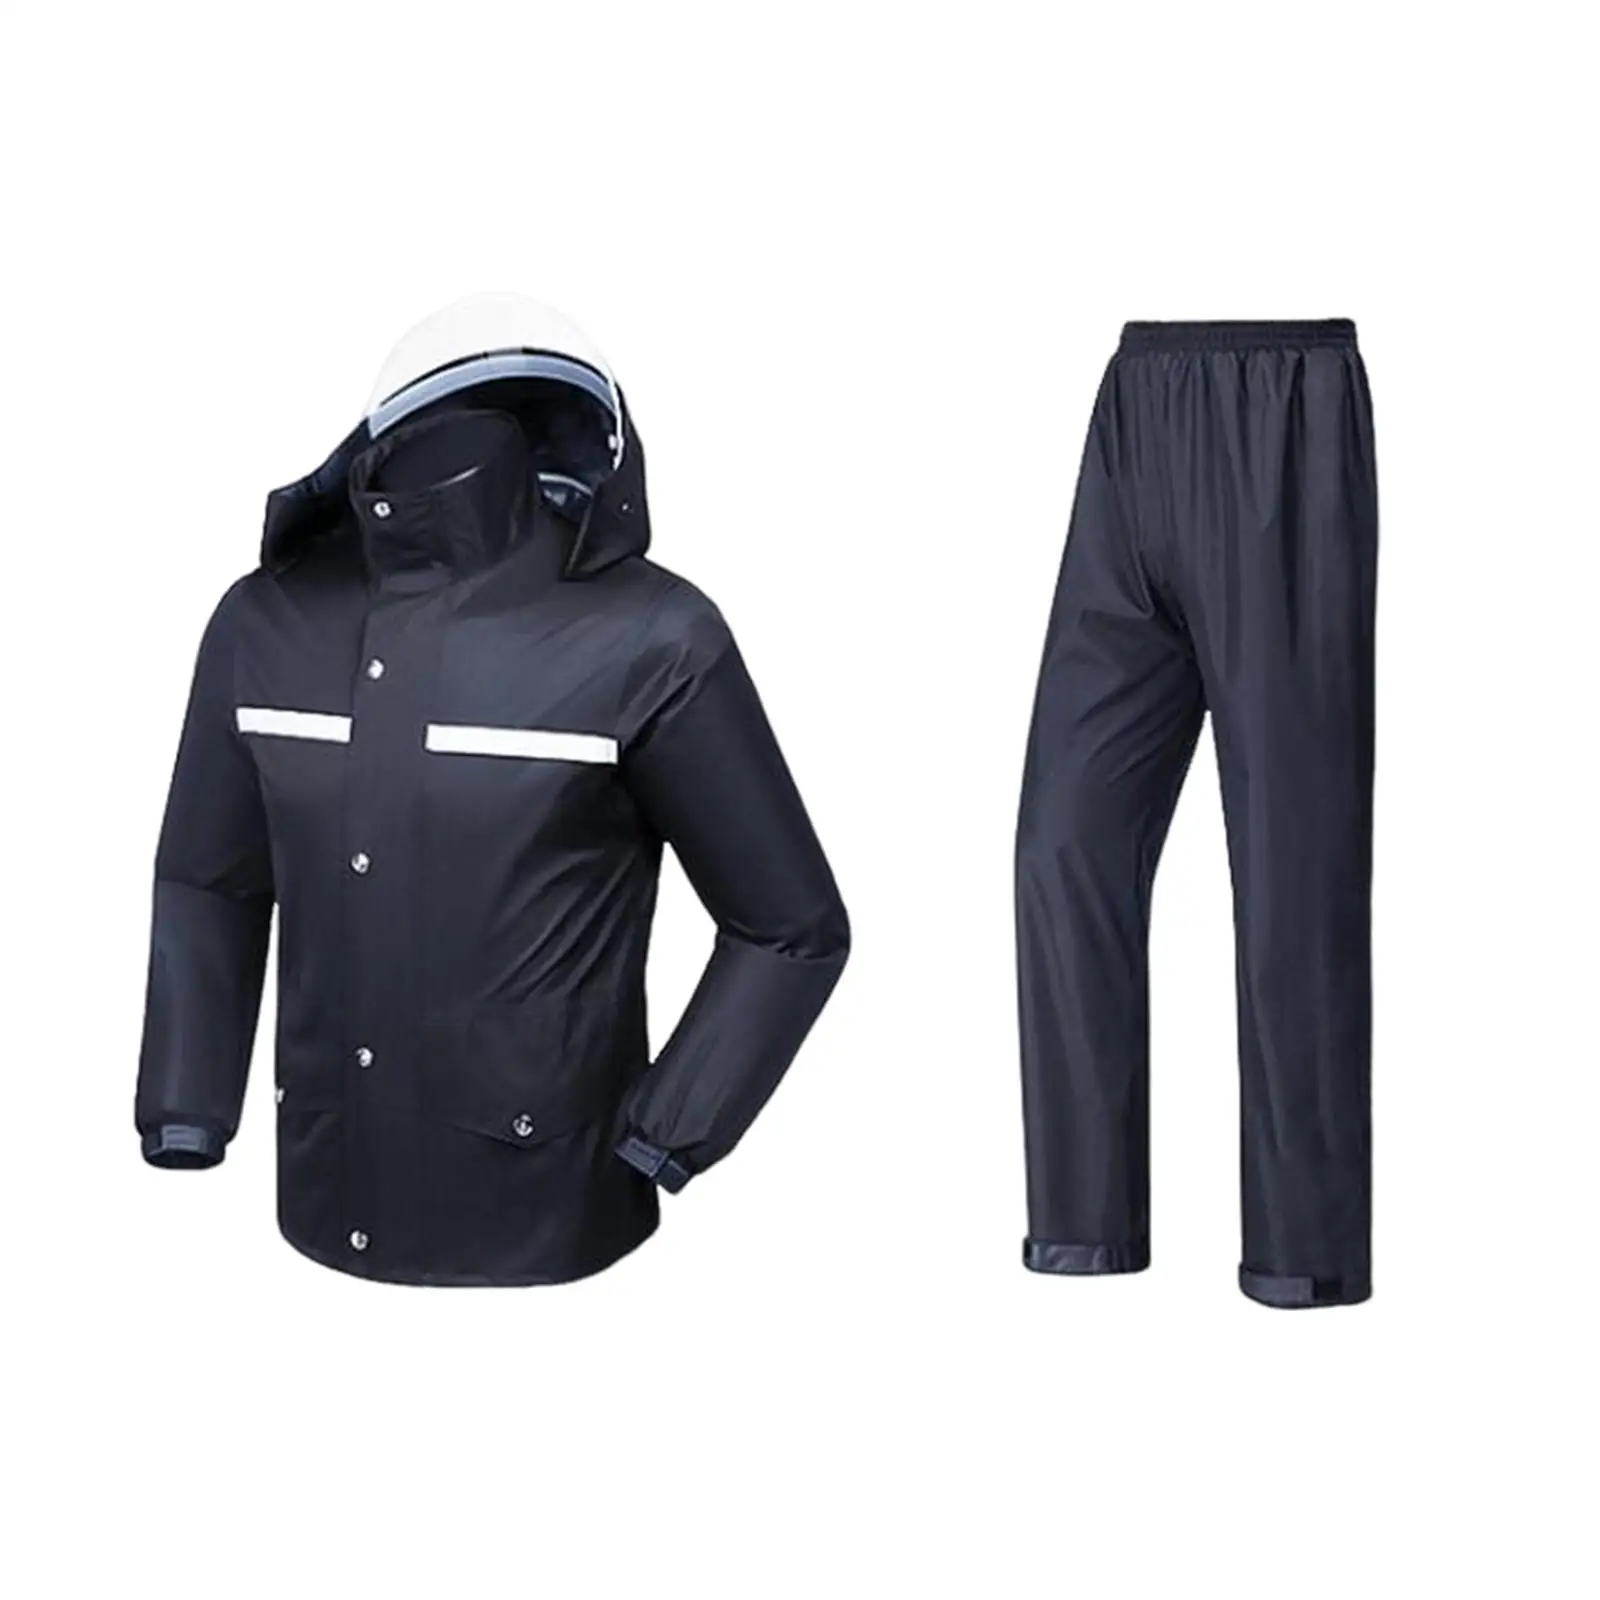 Rain Suit Jacket and Trouser Suit Hooded Breathable Elastic Machine Wash Durable Lightweight Clear Double Brim for Outdoor